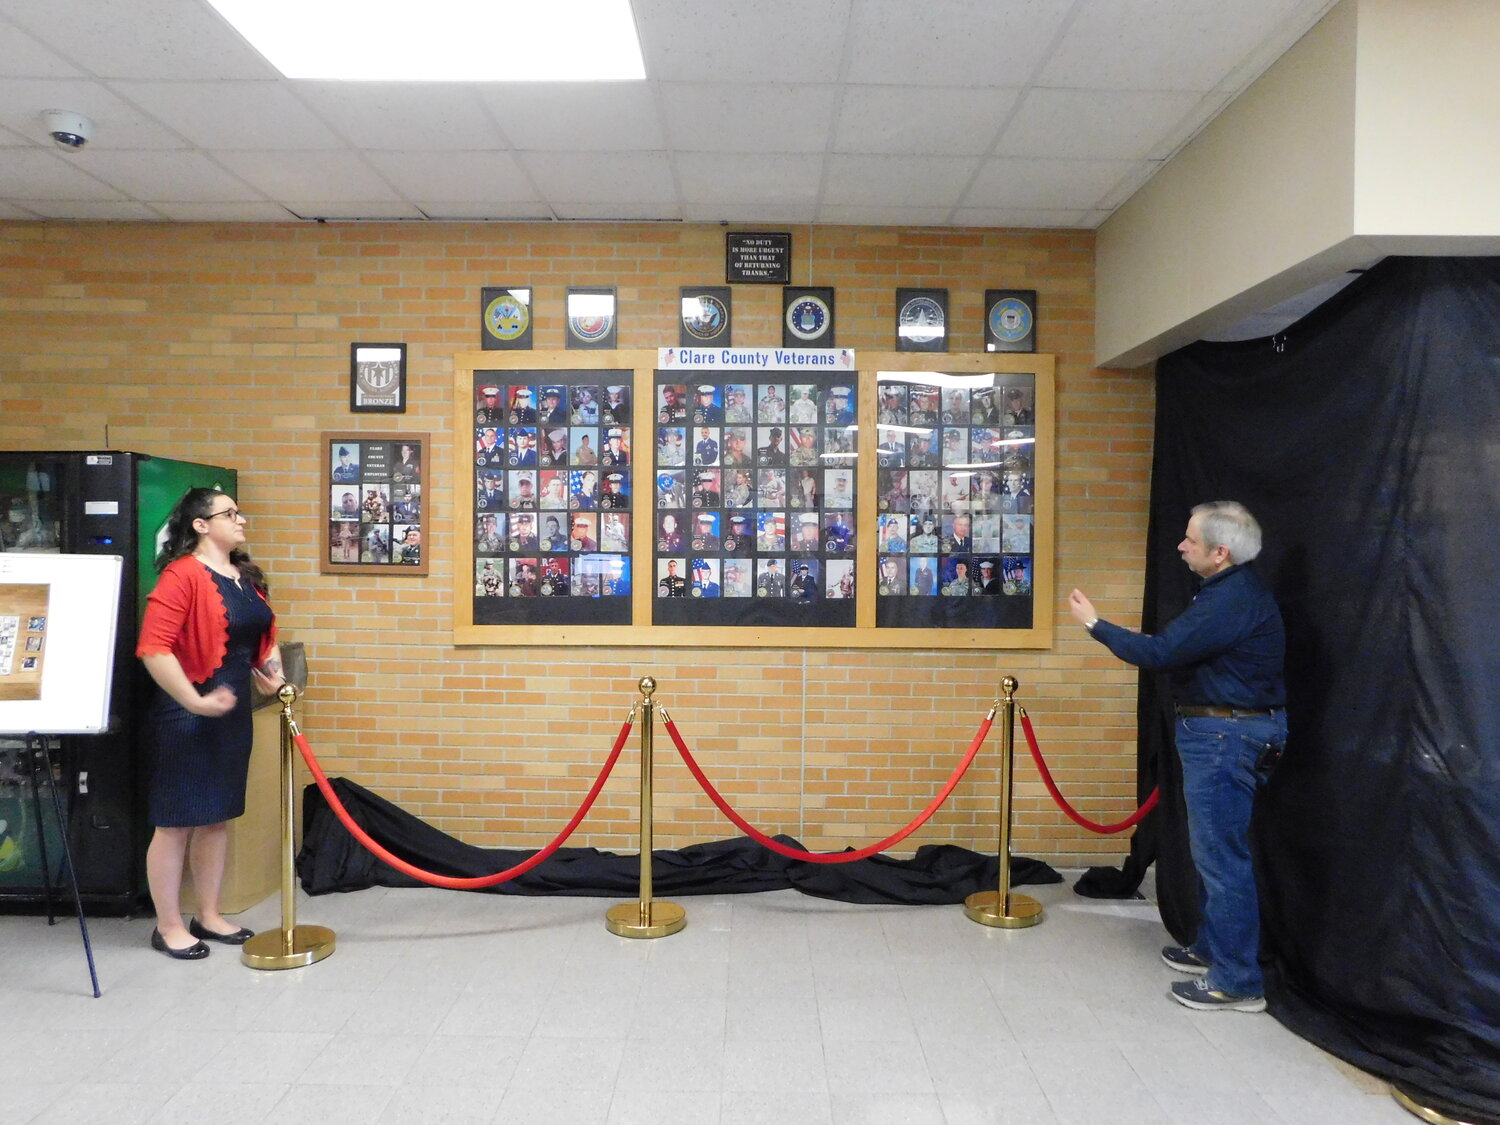 Karl Hauser drops the veiling backdrop curtain Tuesday, May 9, revealing the revamped Honor Wall in the main lobby of the Clare County Building.